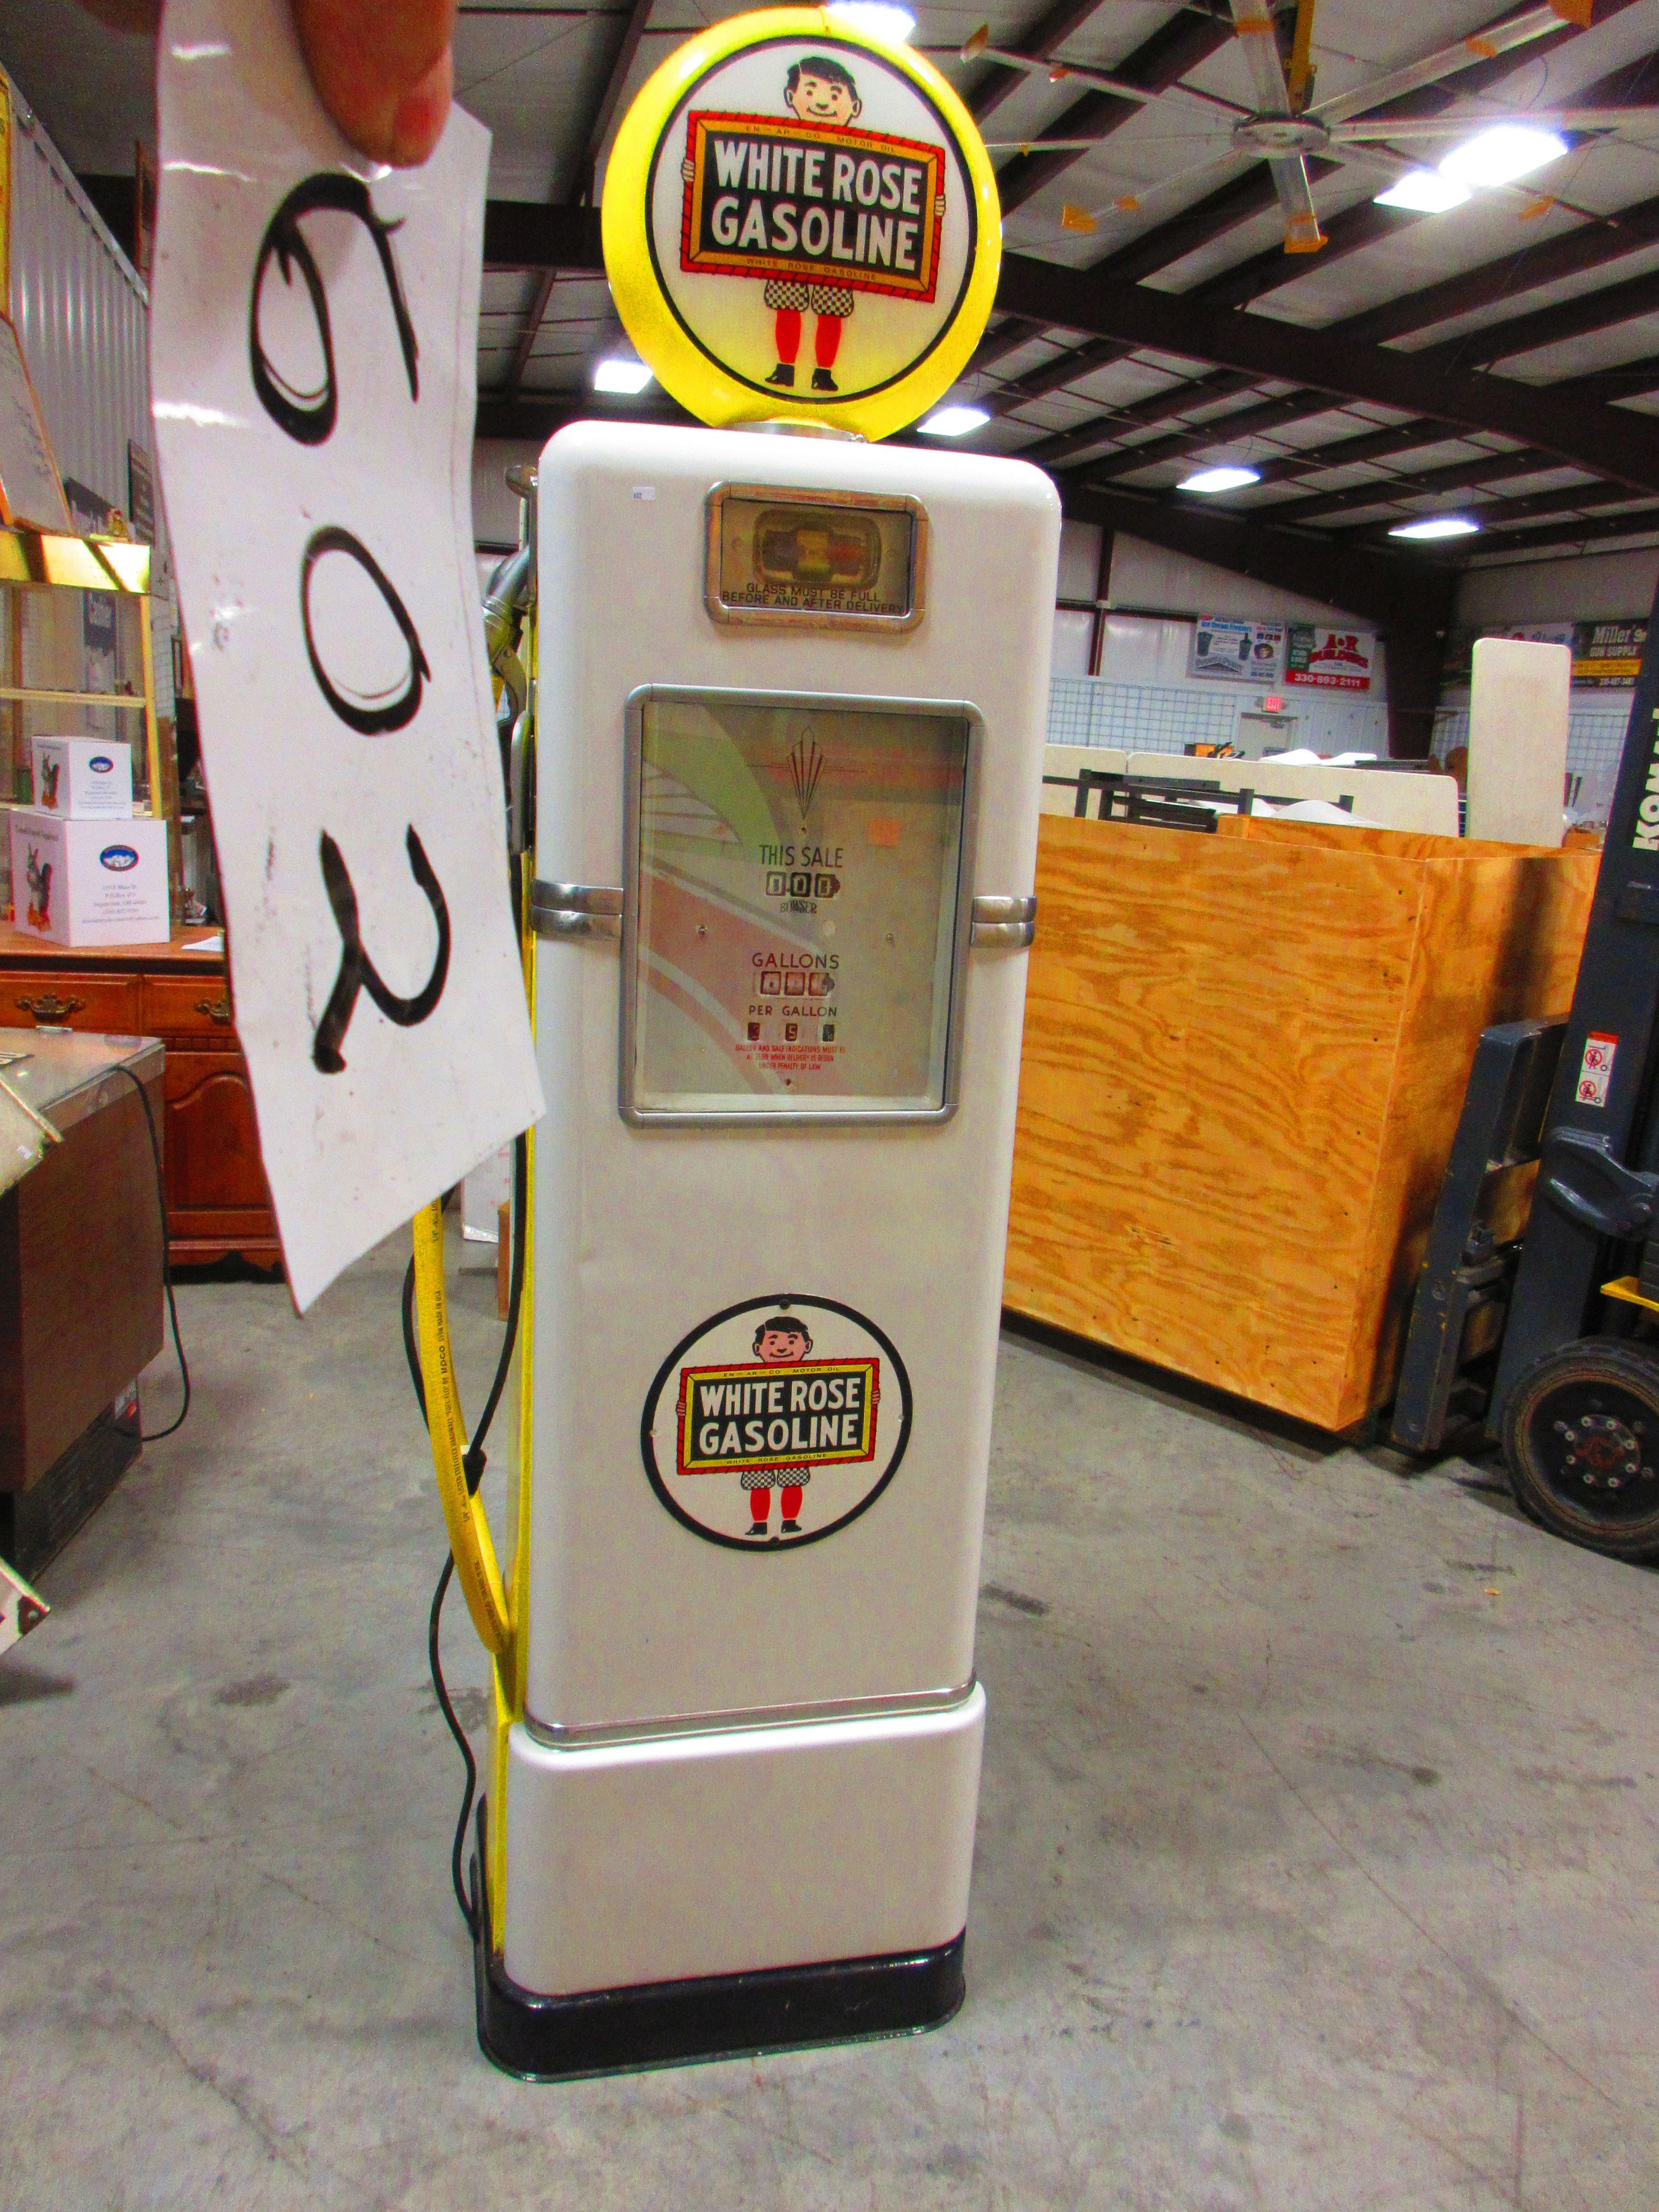 BOESER GAS PUMP RESTORED TO WHITE ROSE GREAT RESTORATION JOB NICE COLORS WILL LOOK GREAT IN YOUR GAR